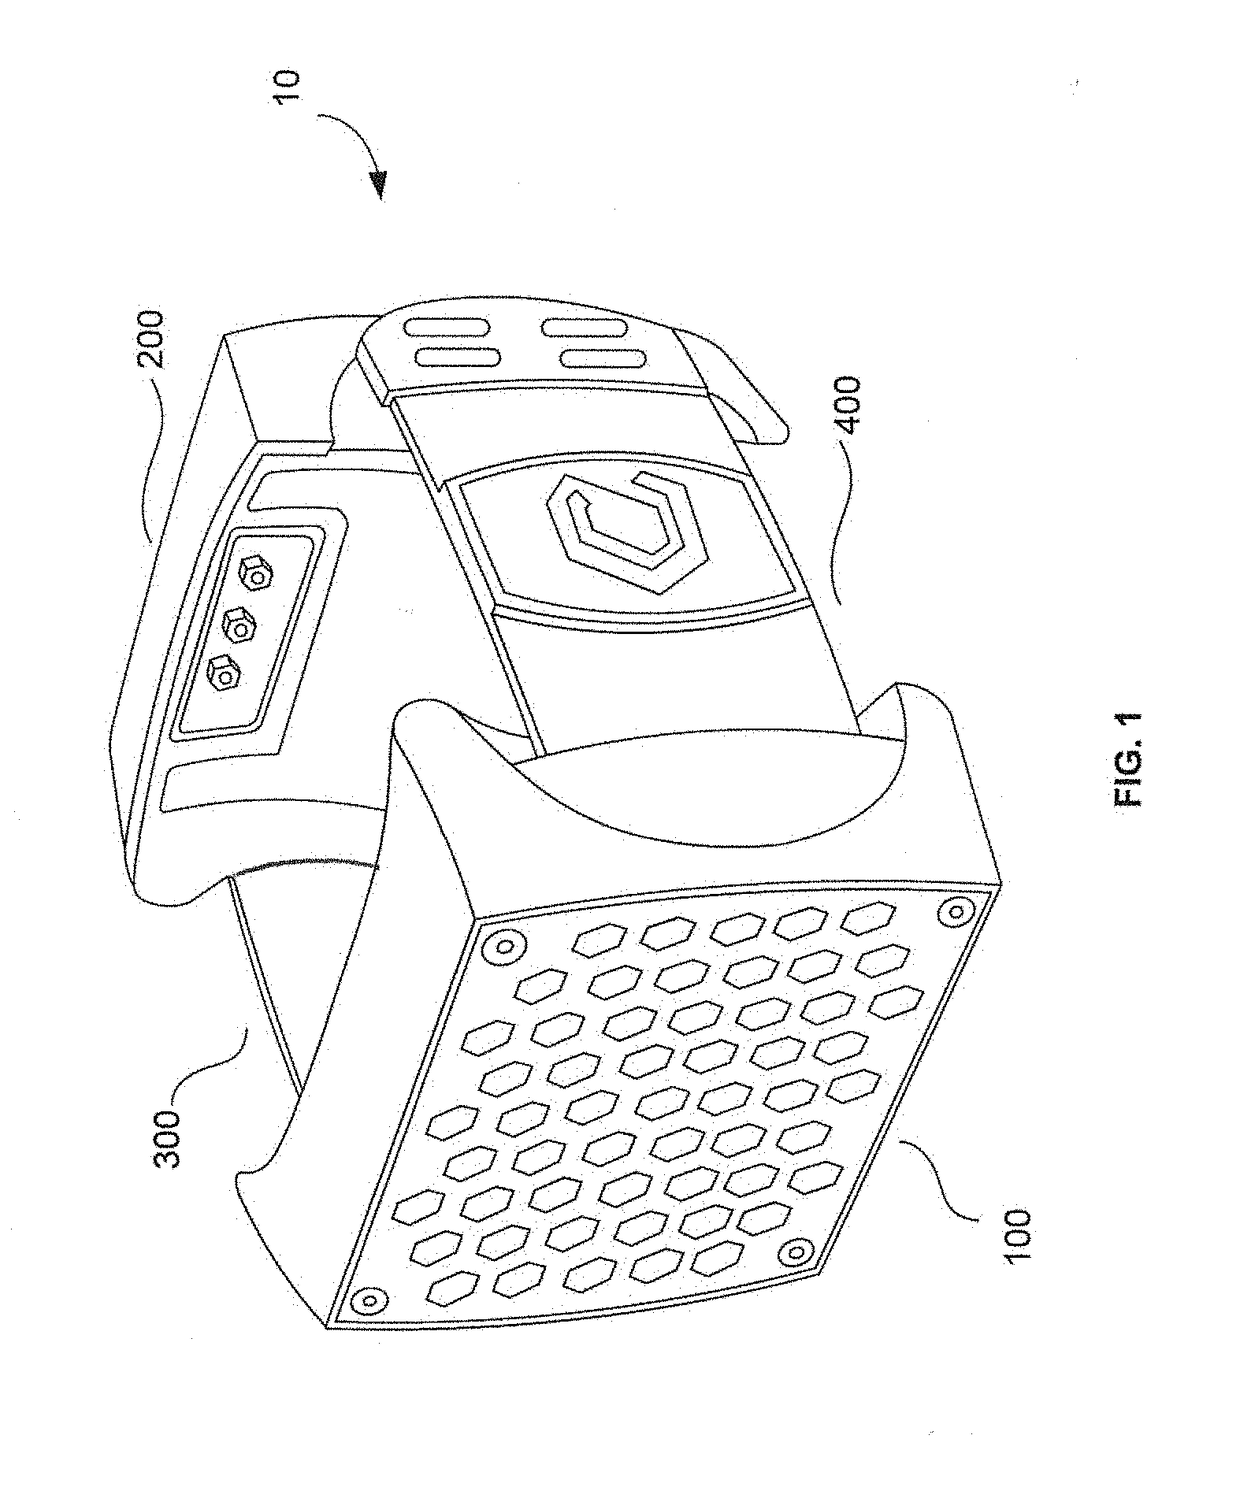 Device for providing body temperature regulation and/or therapeutic light directed to vasculature